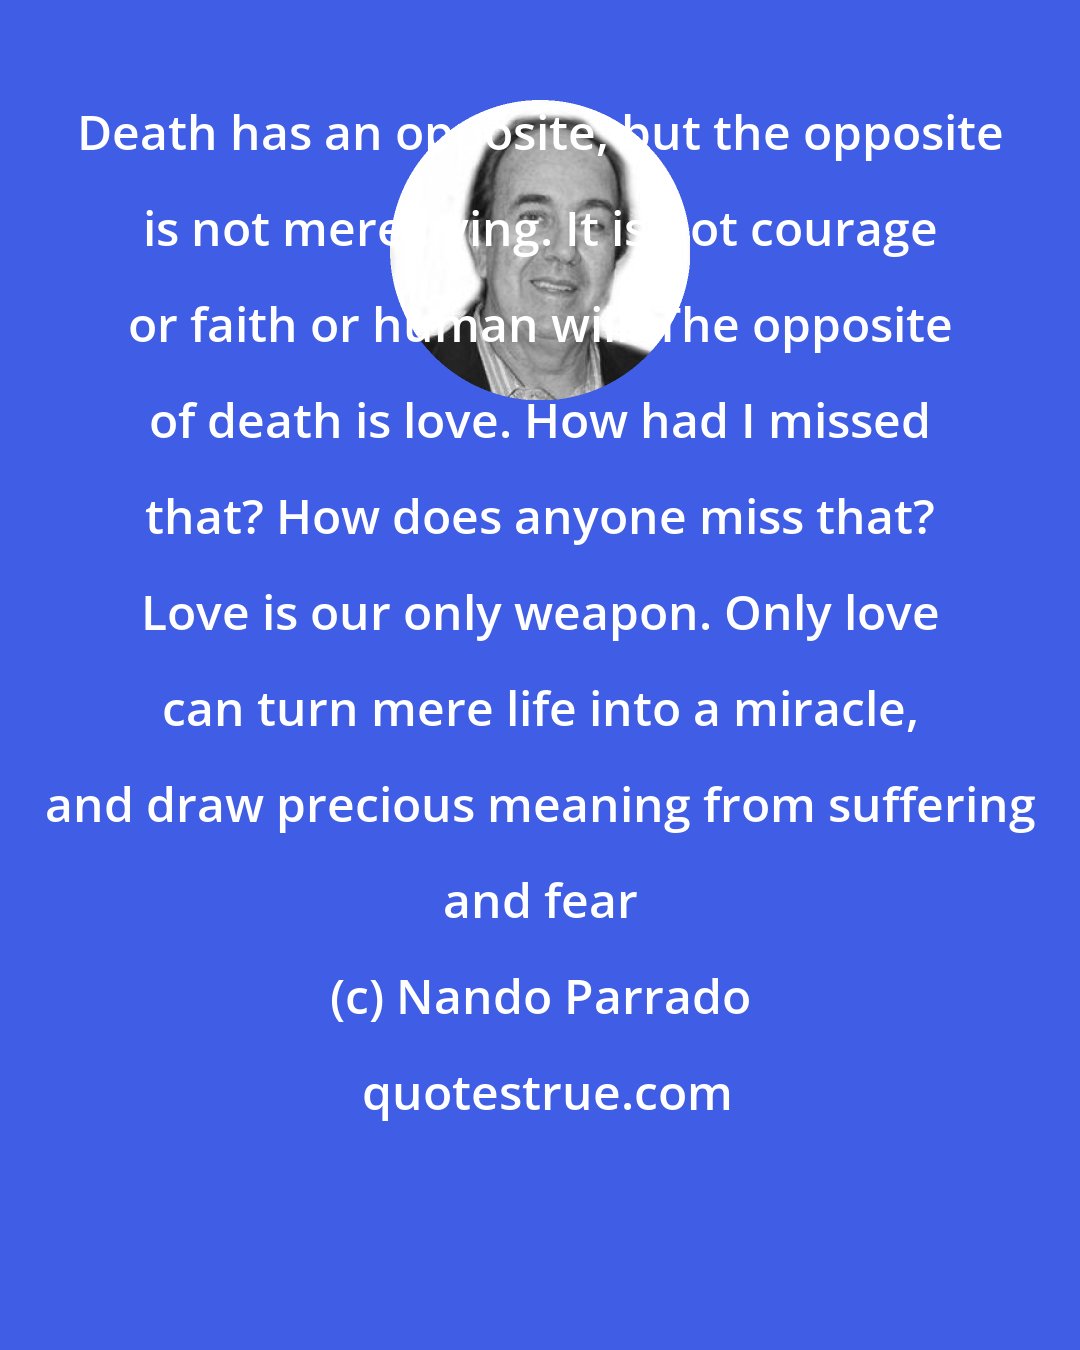 Nando Parrado: Death has an opposite, but the opposite is not mere living. It is not courage or faith or human will. The opposite of death is love. How had I missed that? How does anyone miss that? Love is our only weapon. Only love can turn mere life into a miracle, and draw precious meaning from suffering and fear